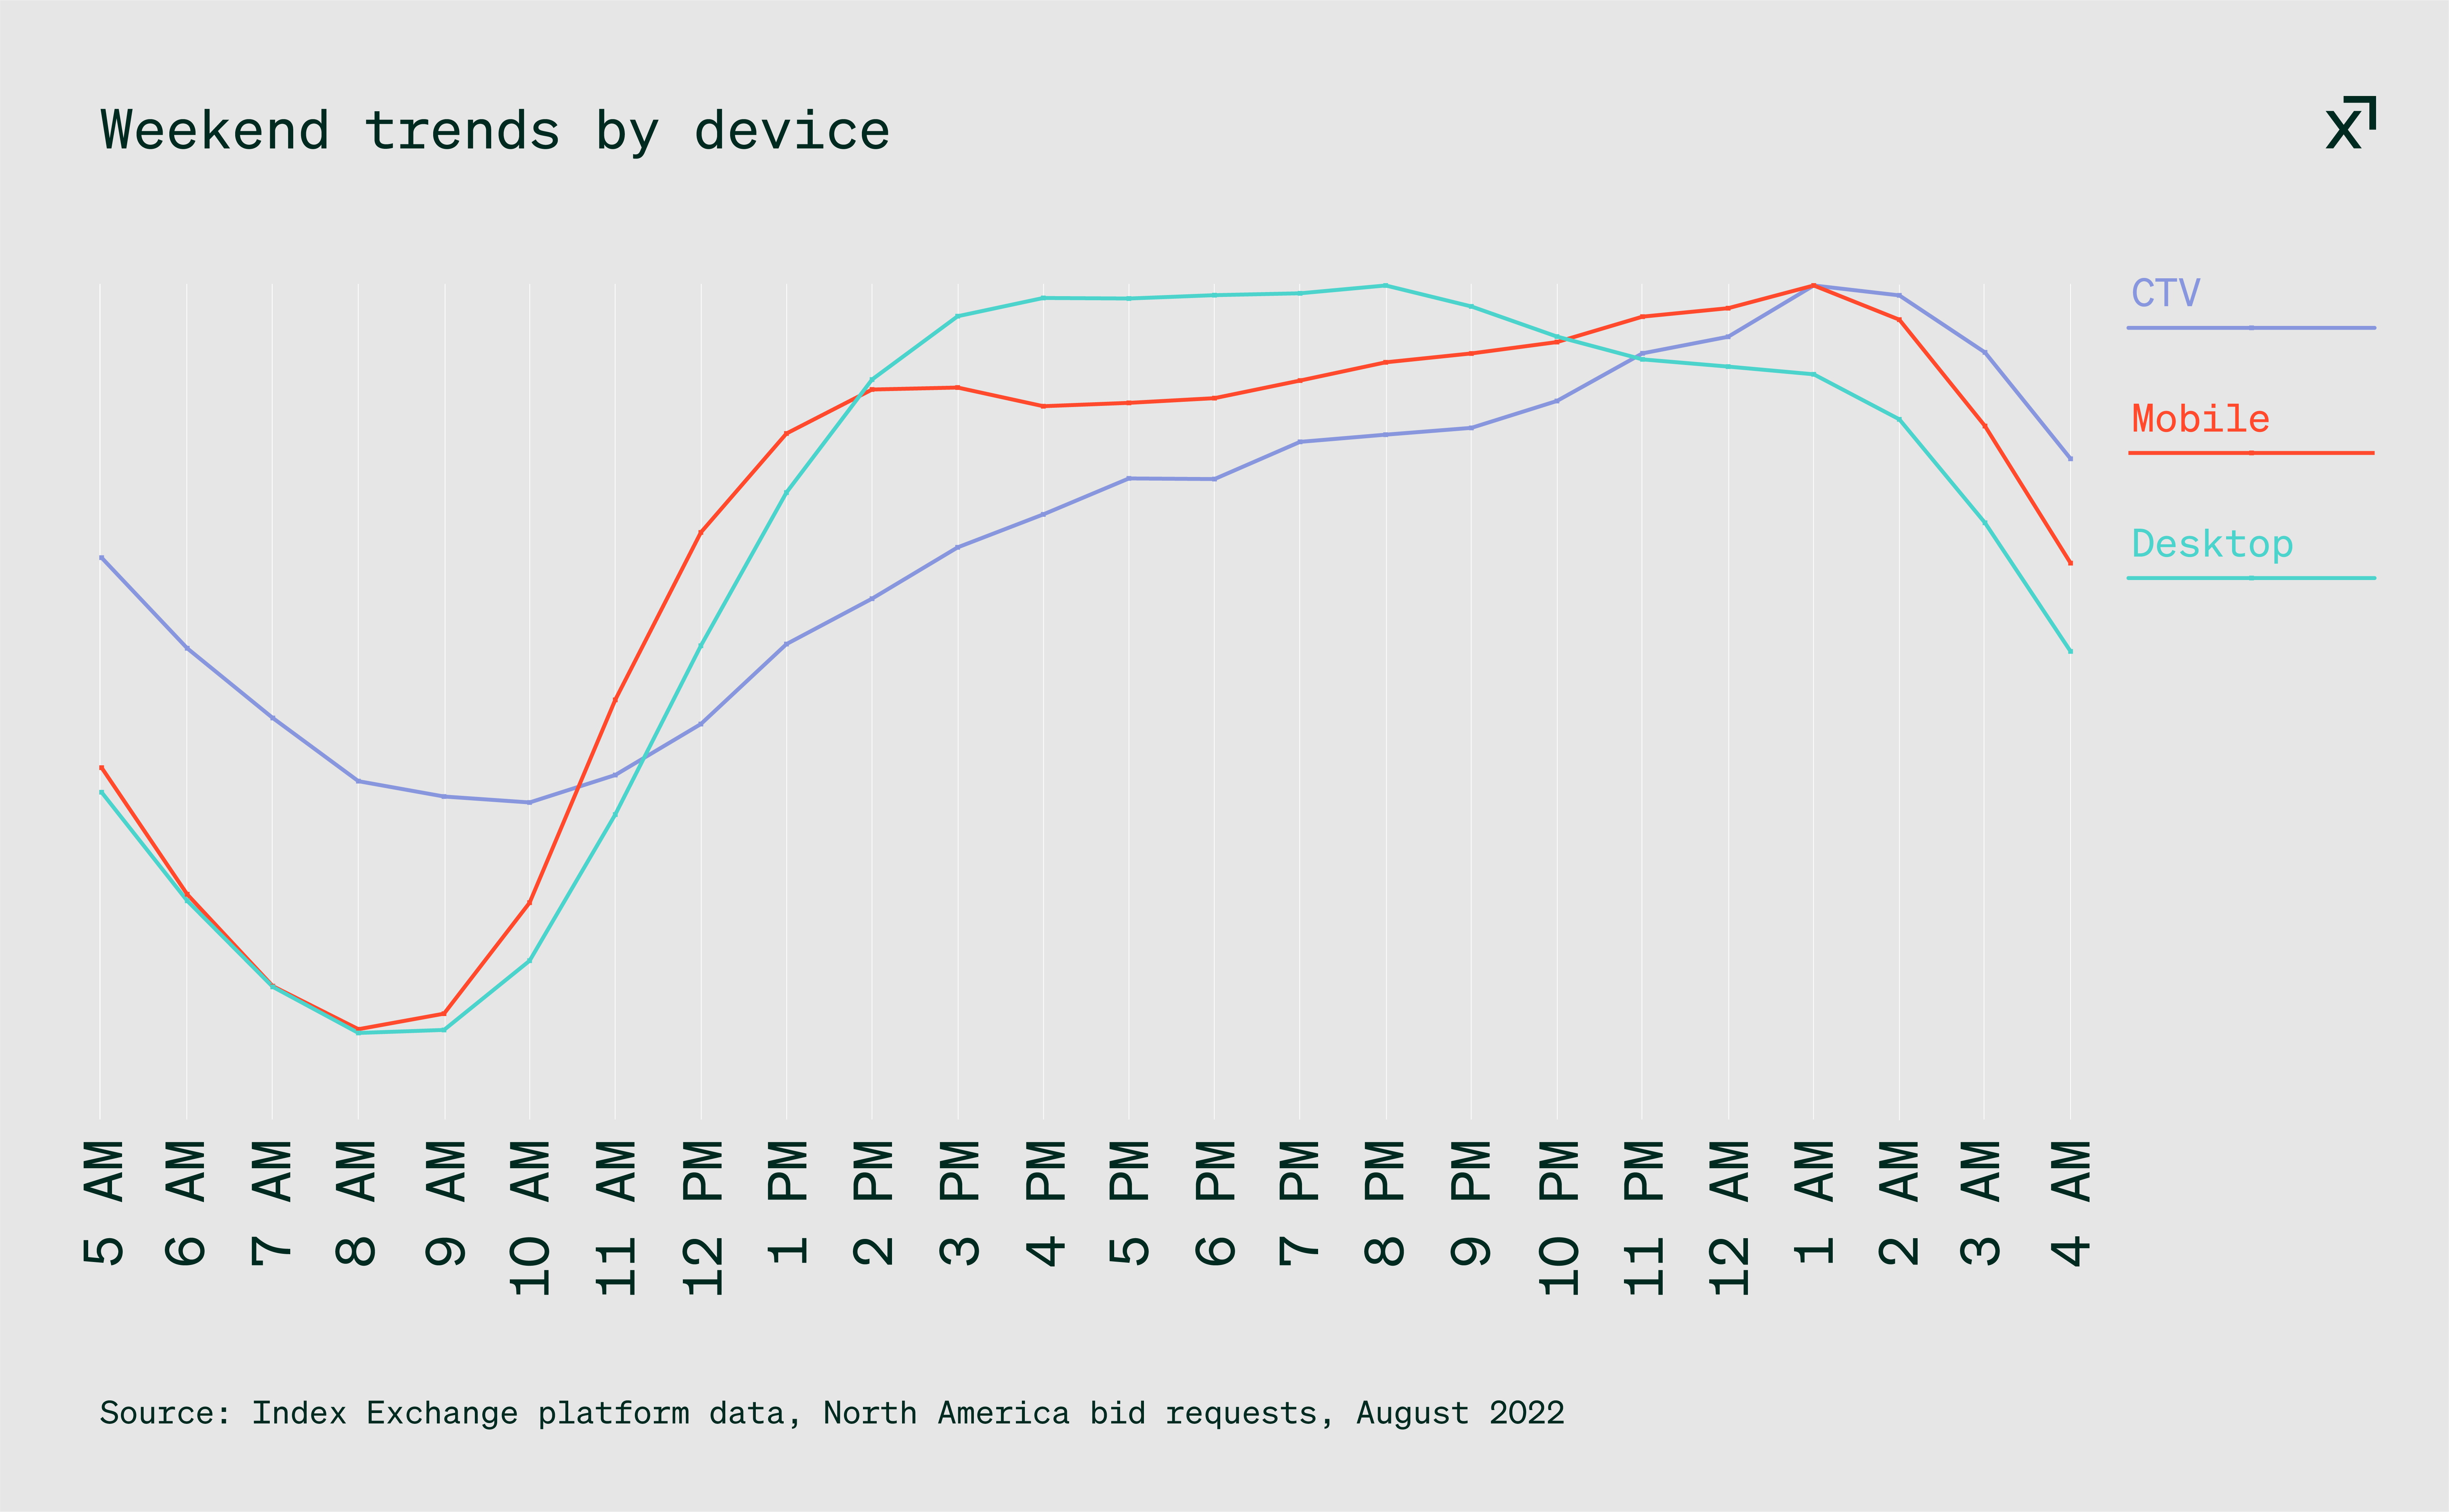 Weekend trends by device chart: CTV, mobile, and desktop usage over 24 hour period